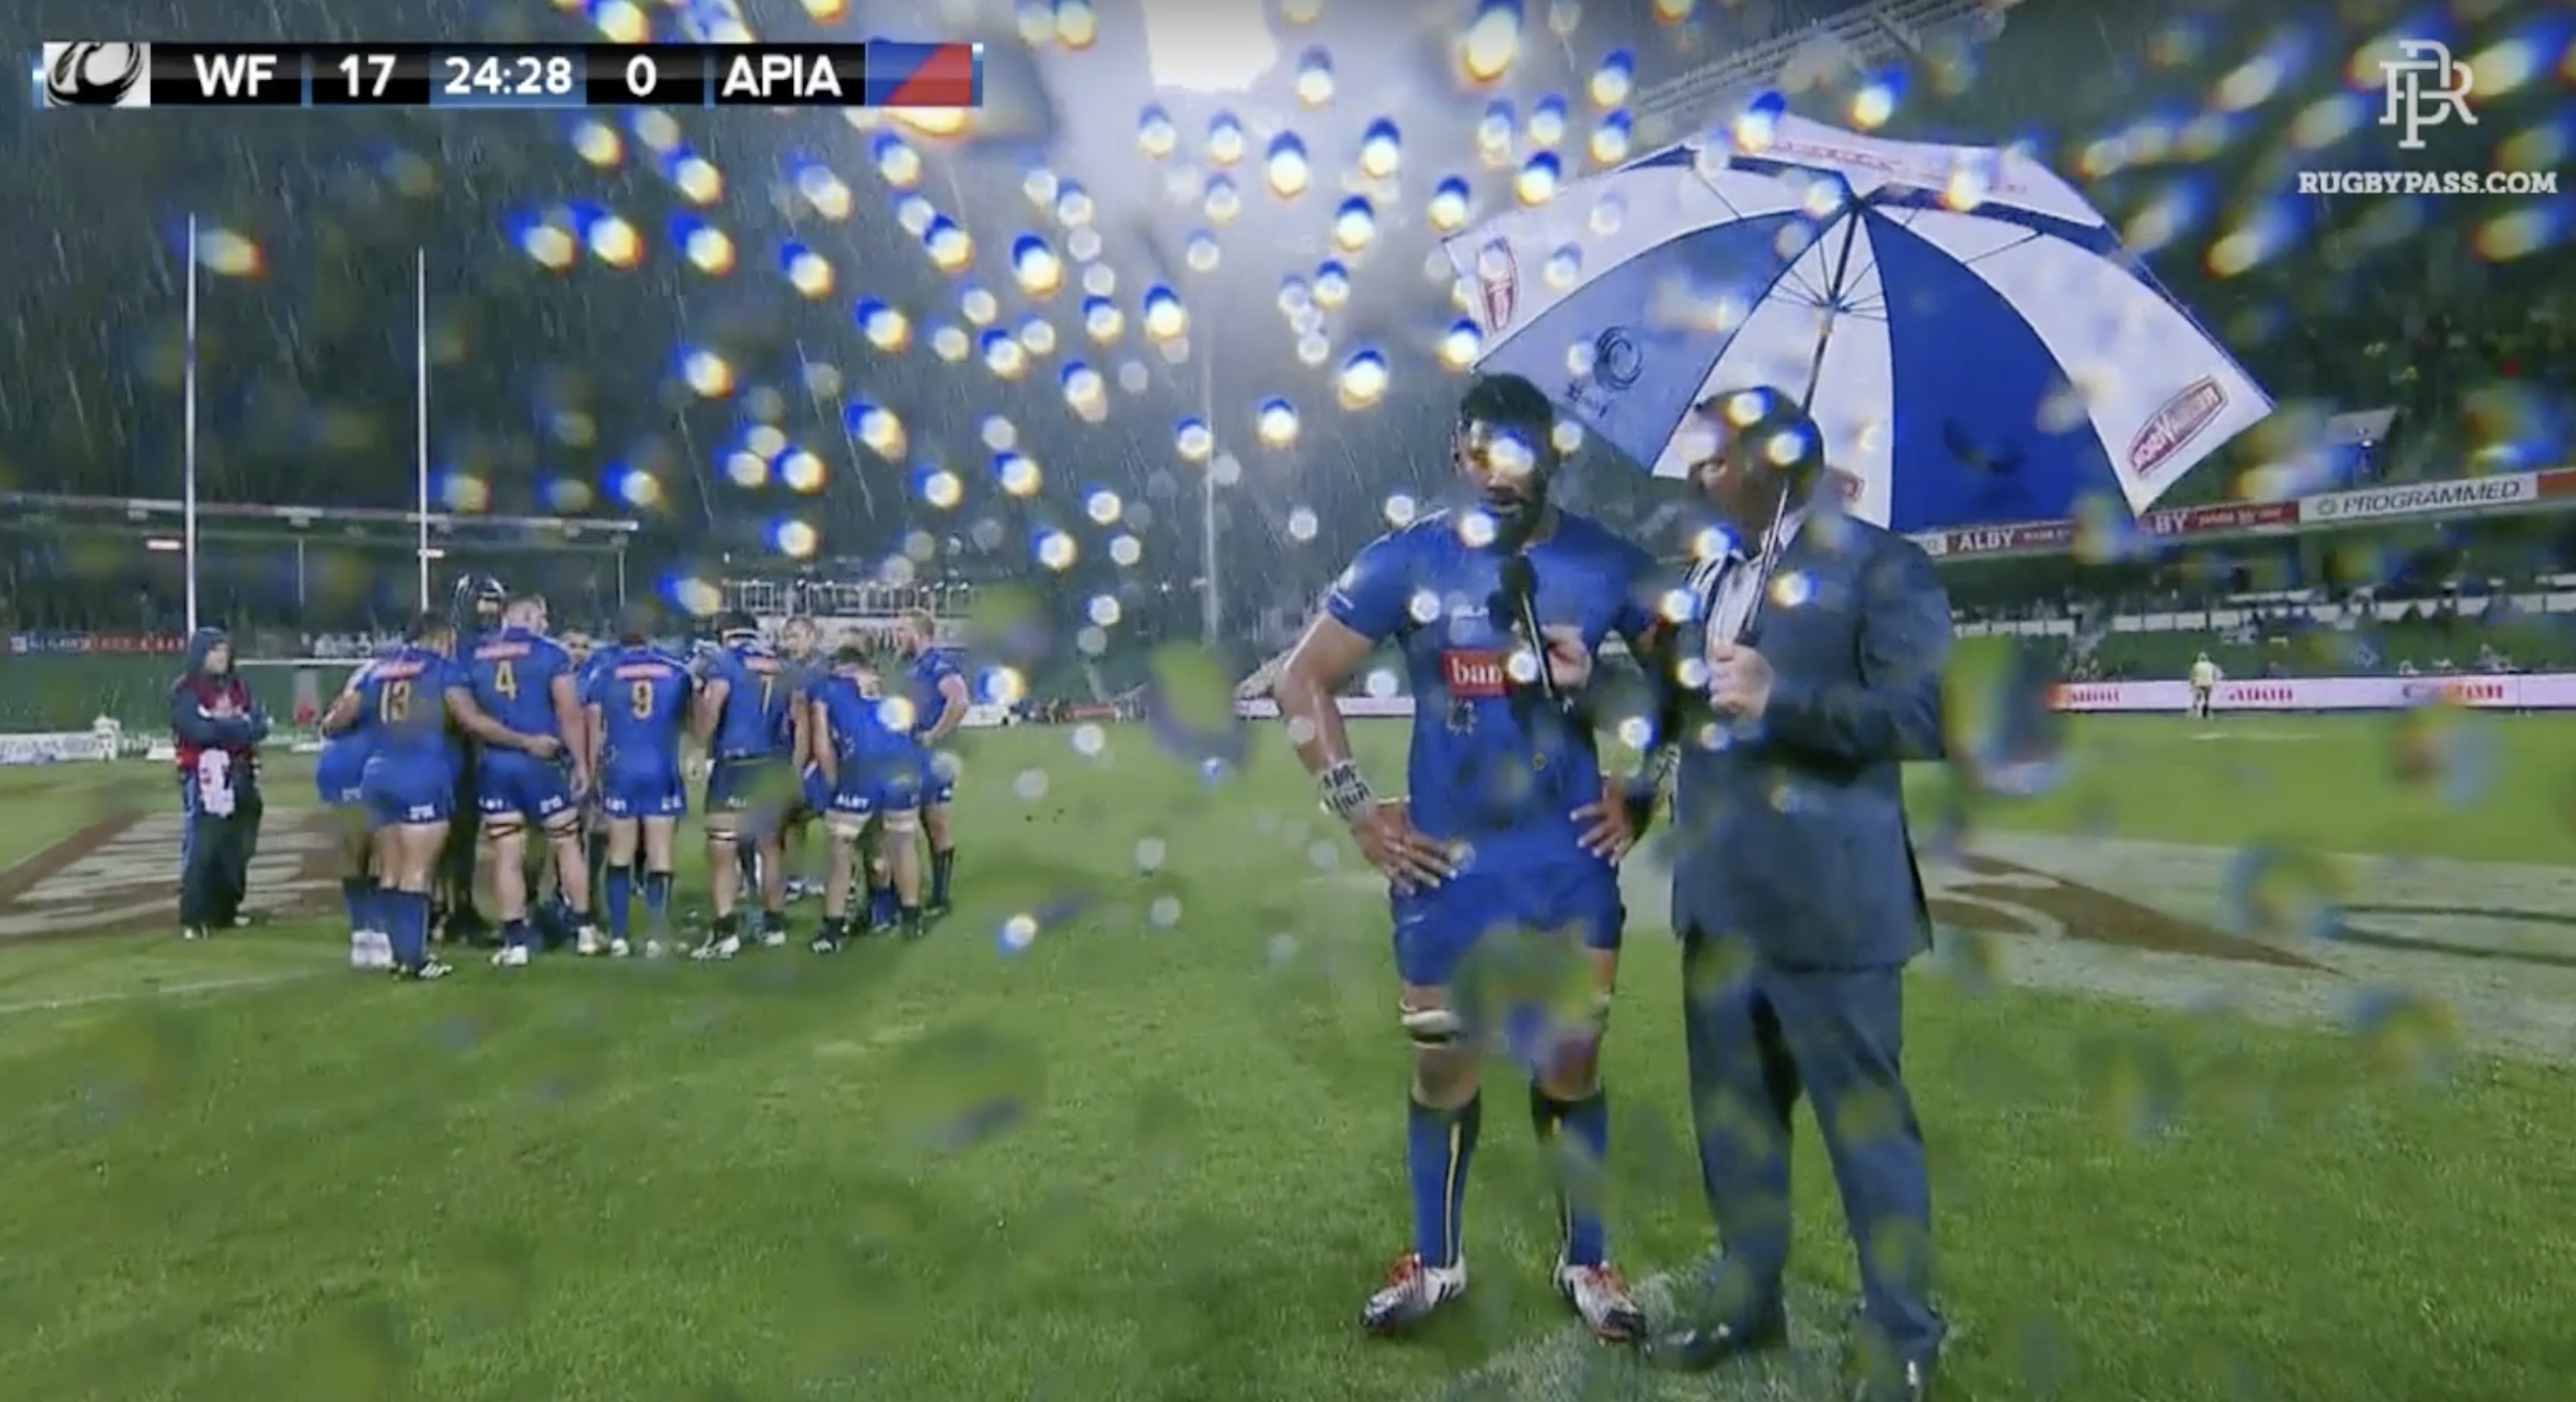 WATCH: Players repeatedly forced to give post try interviews in World Series Clash between Samoa and Western Force